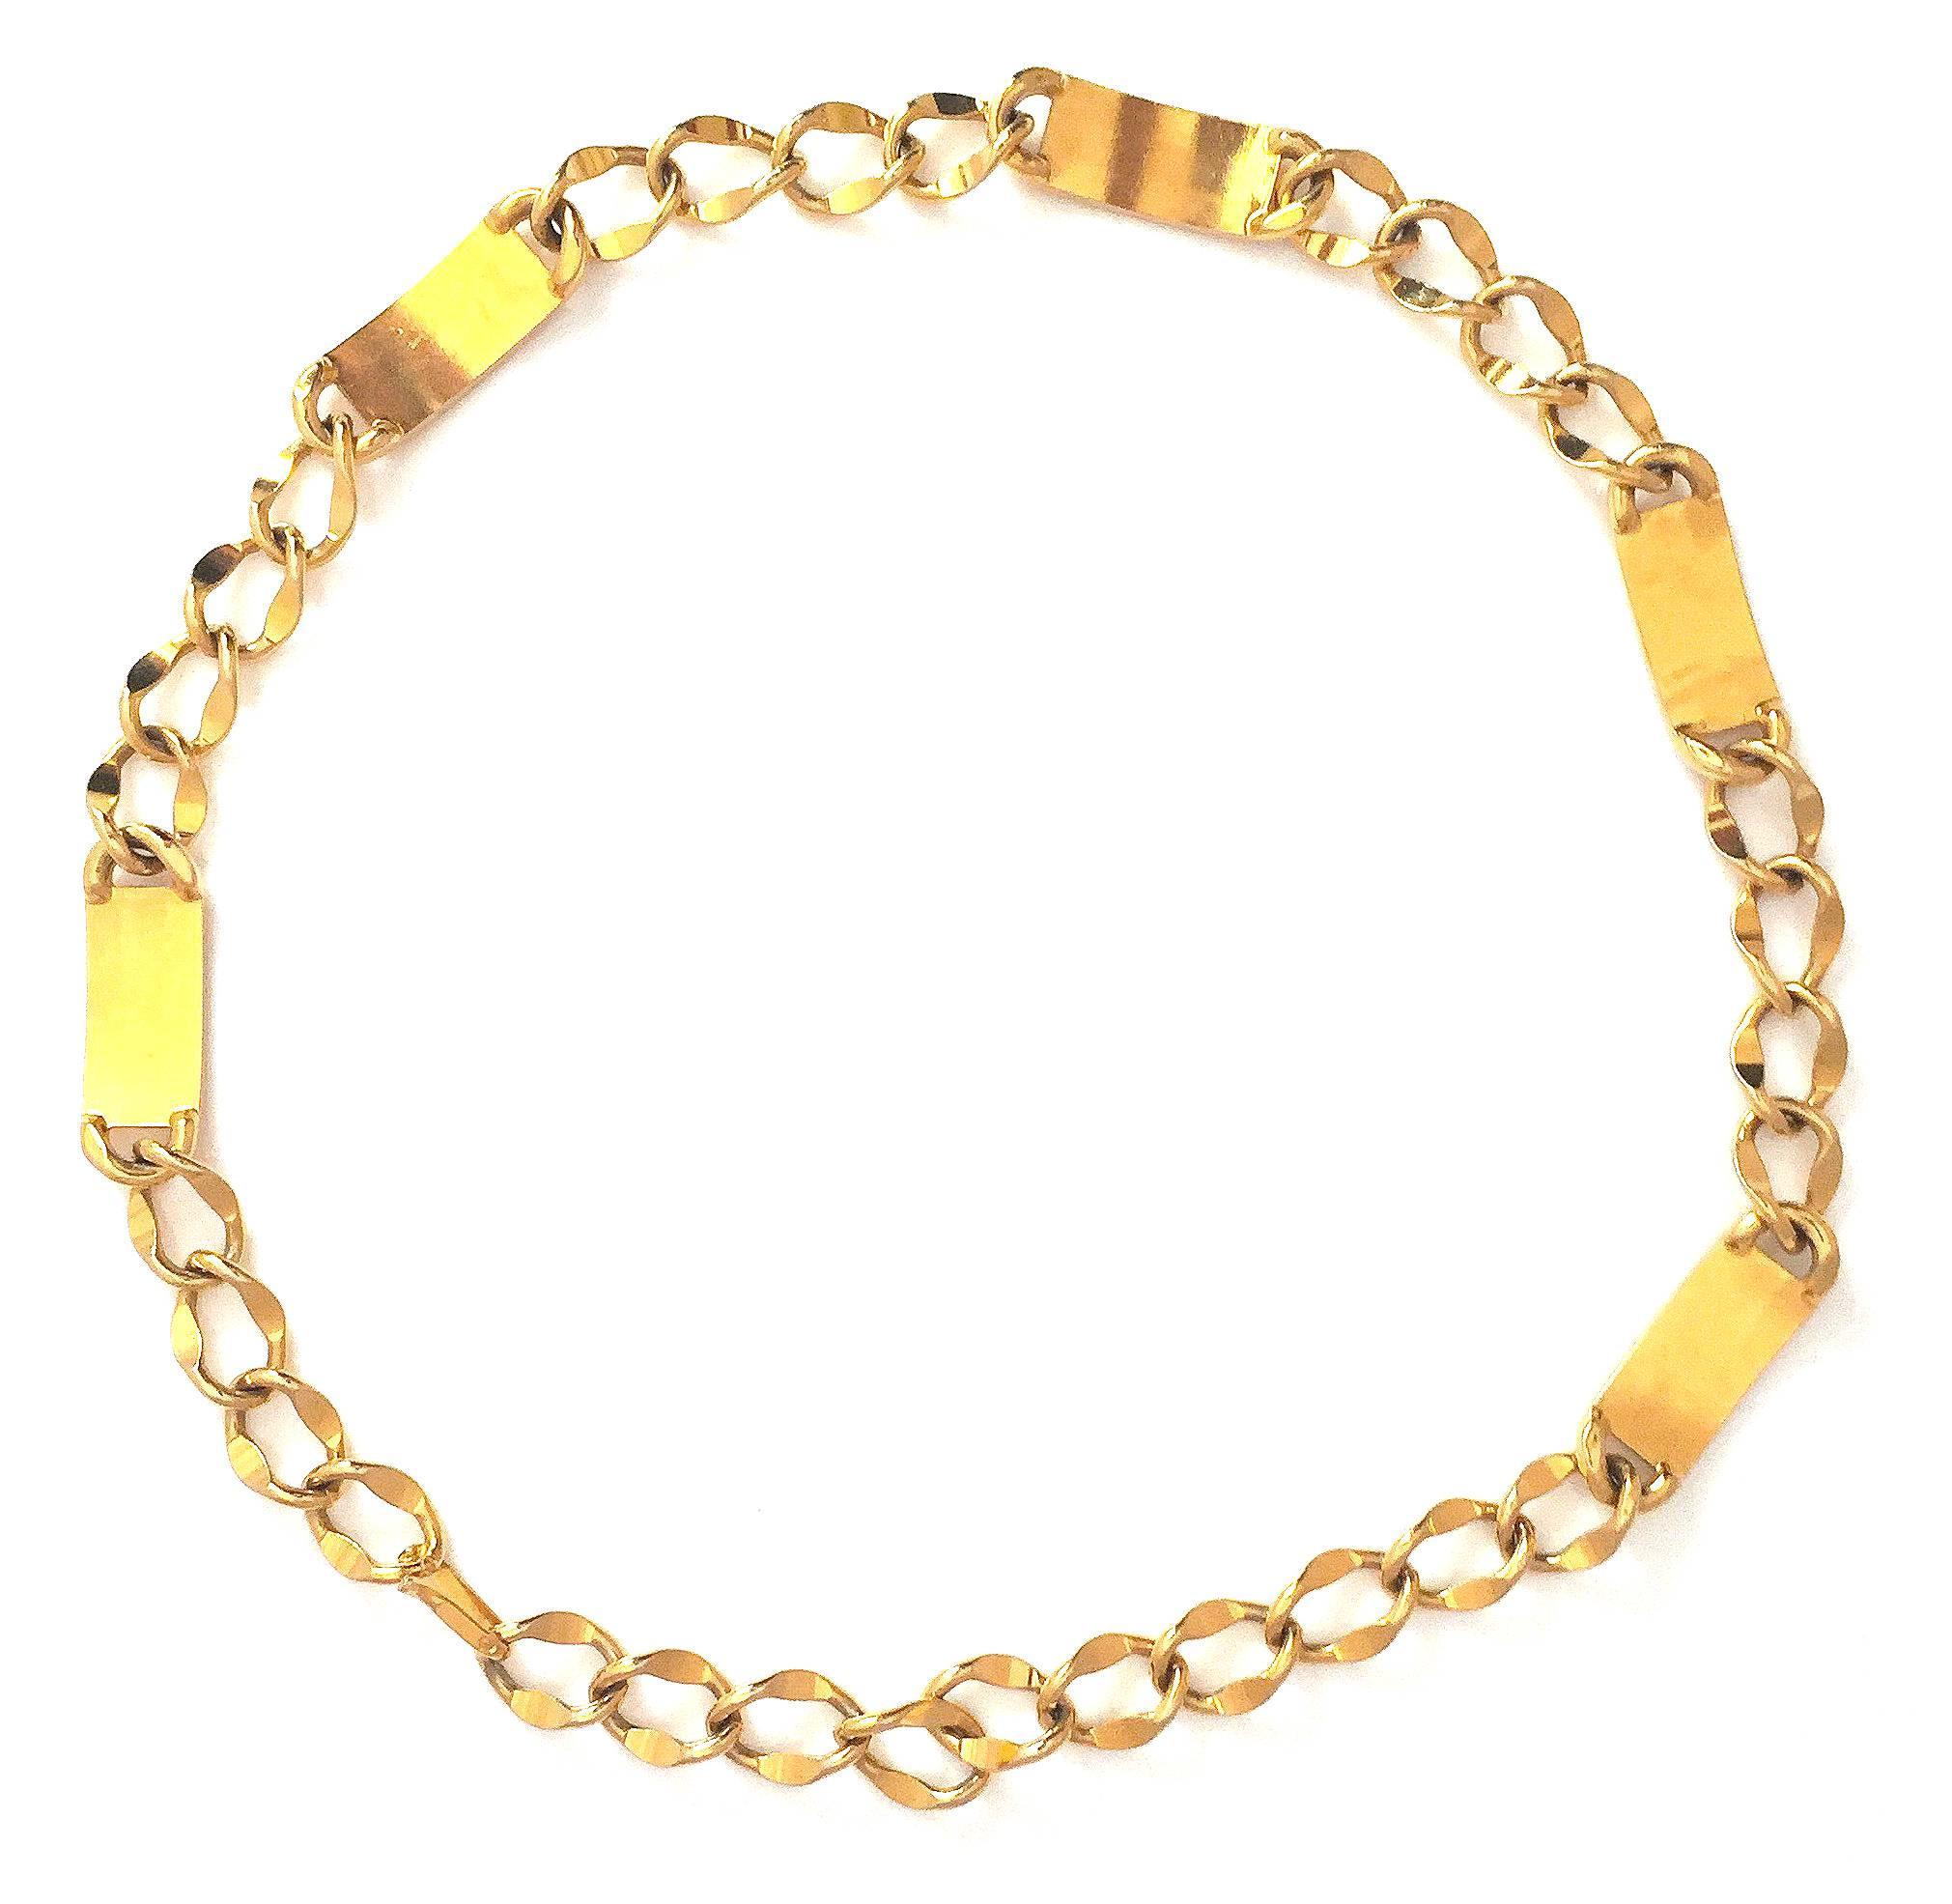 Women's Chanel Vintage Gold-Tone Multi ID Chain Necklace or Belt, Circa 1980s For Sale